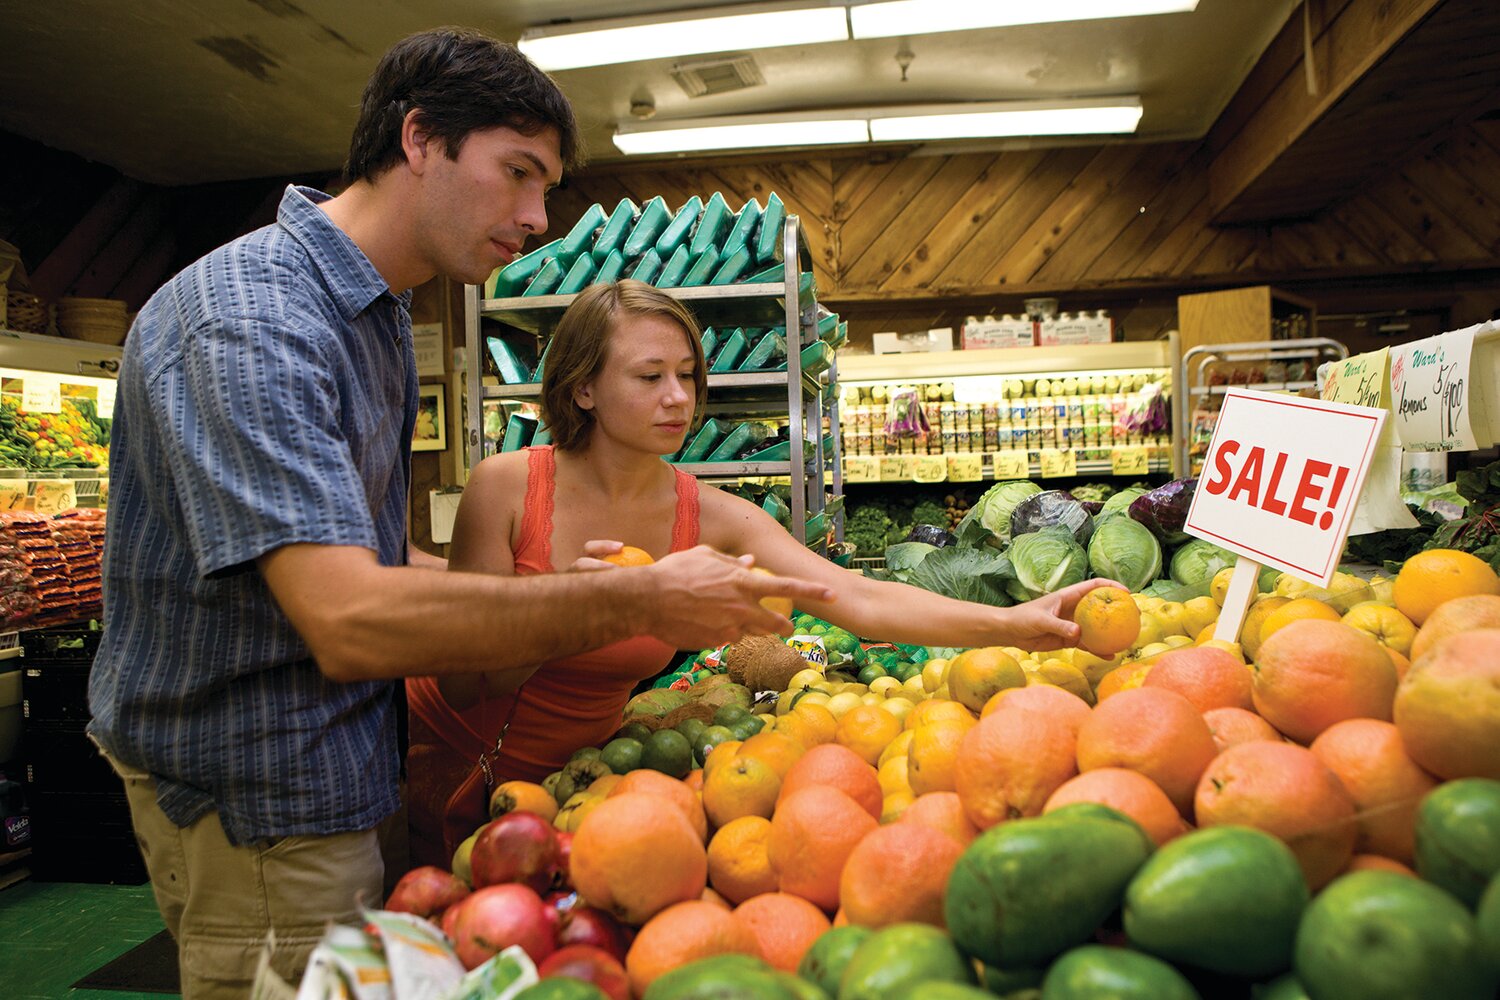 Two customers checking produce in a grocery store.